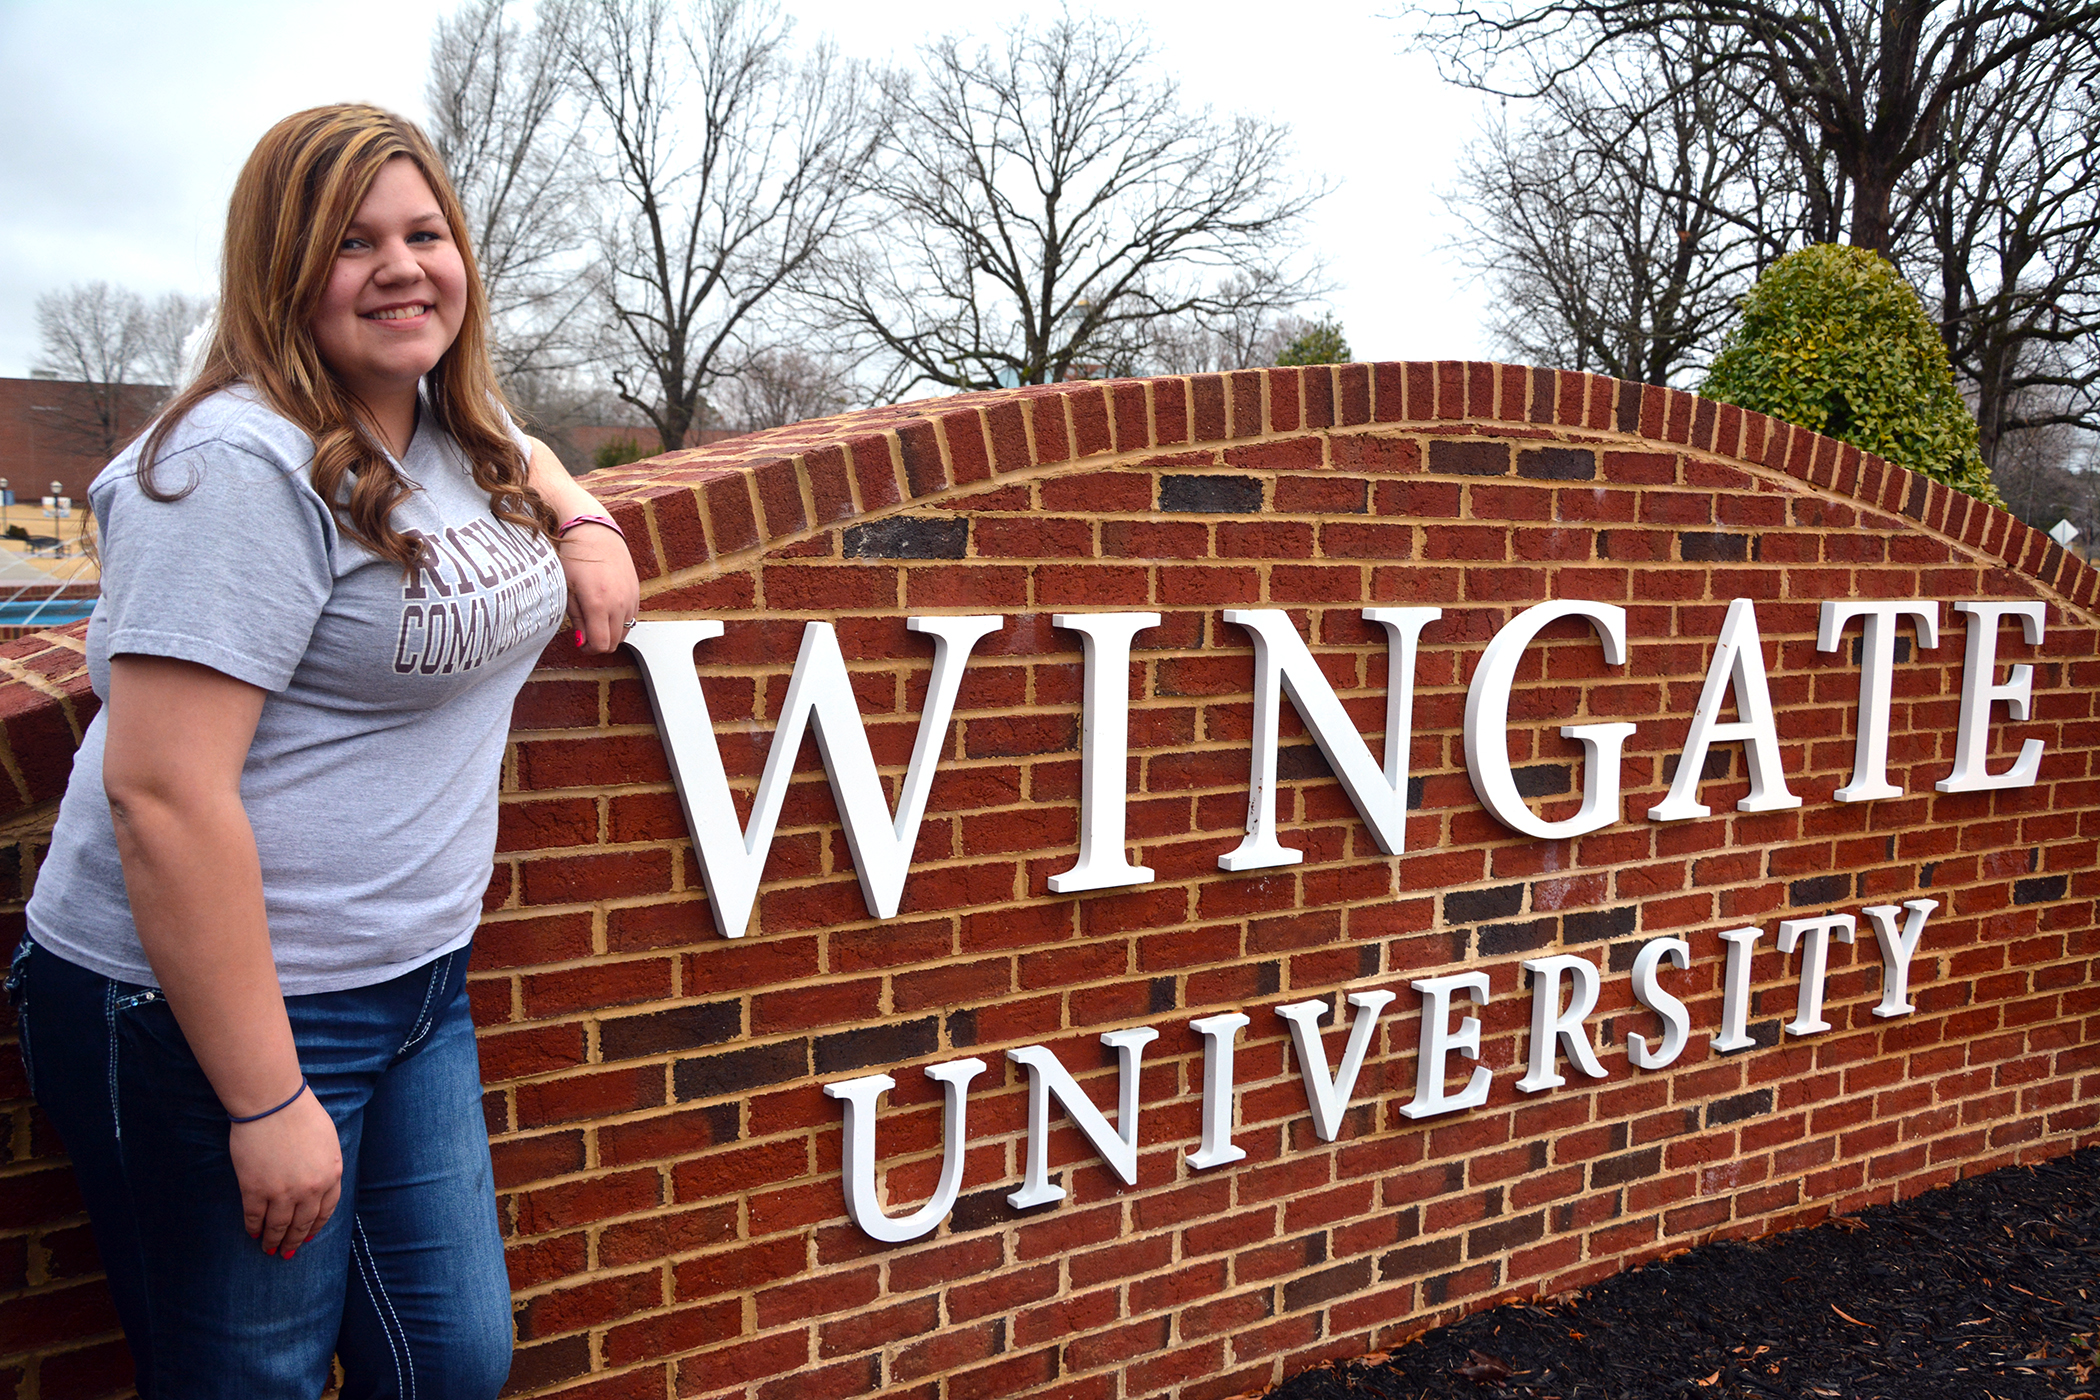 Lisa Hogan, Early College graduate from RCC, stands at the entrance of Wingate University where she is now a nursing student.